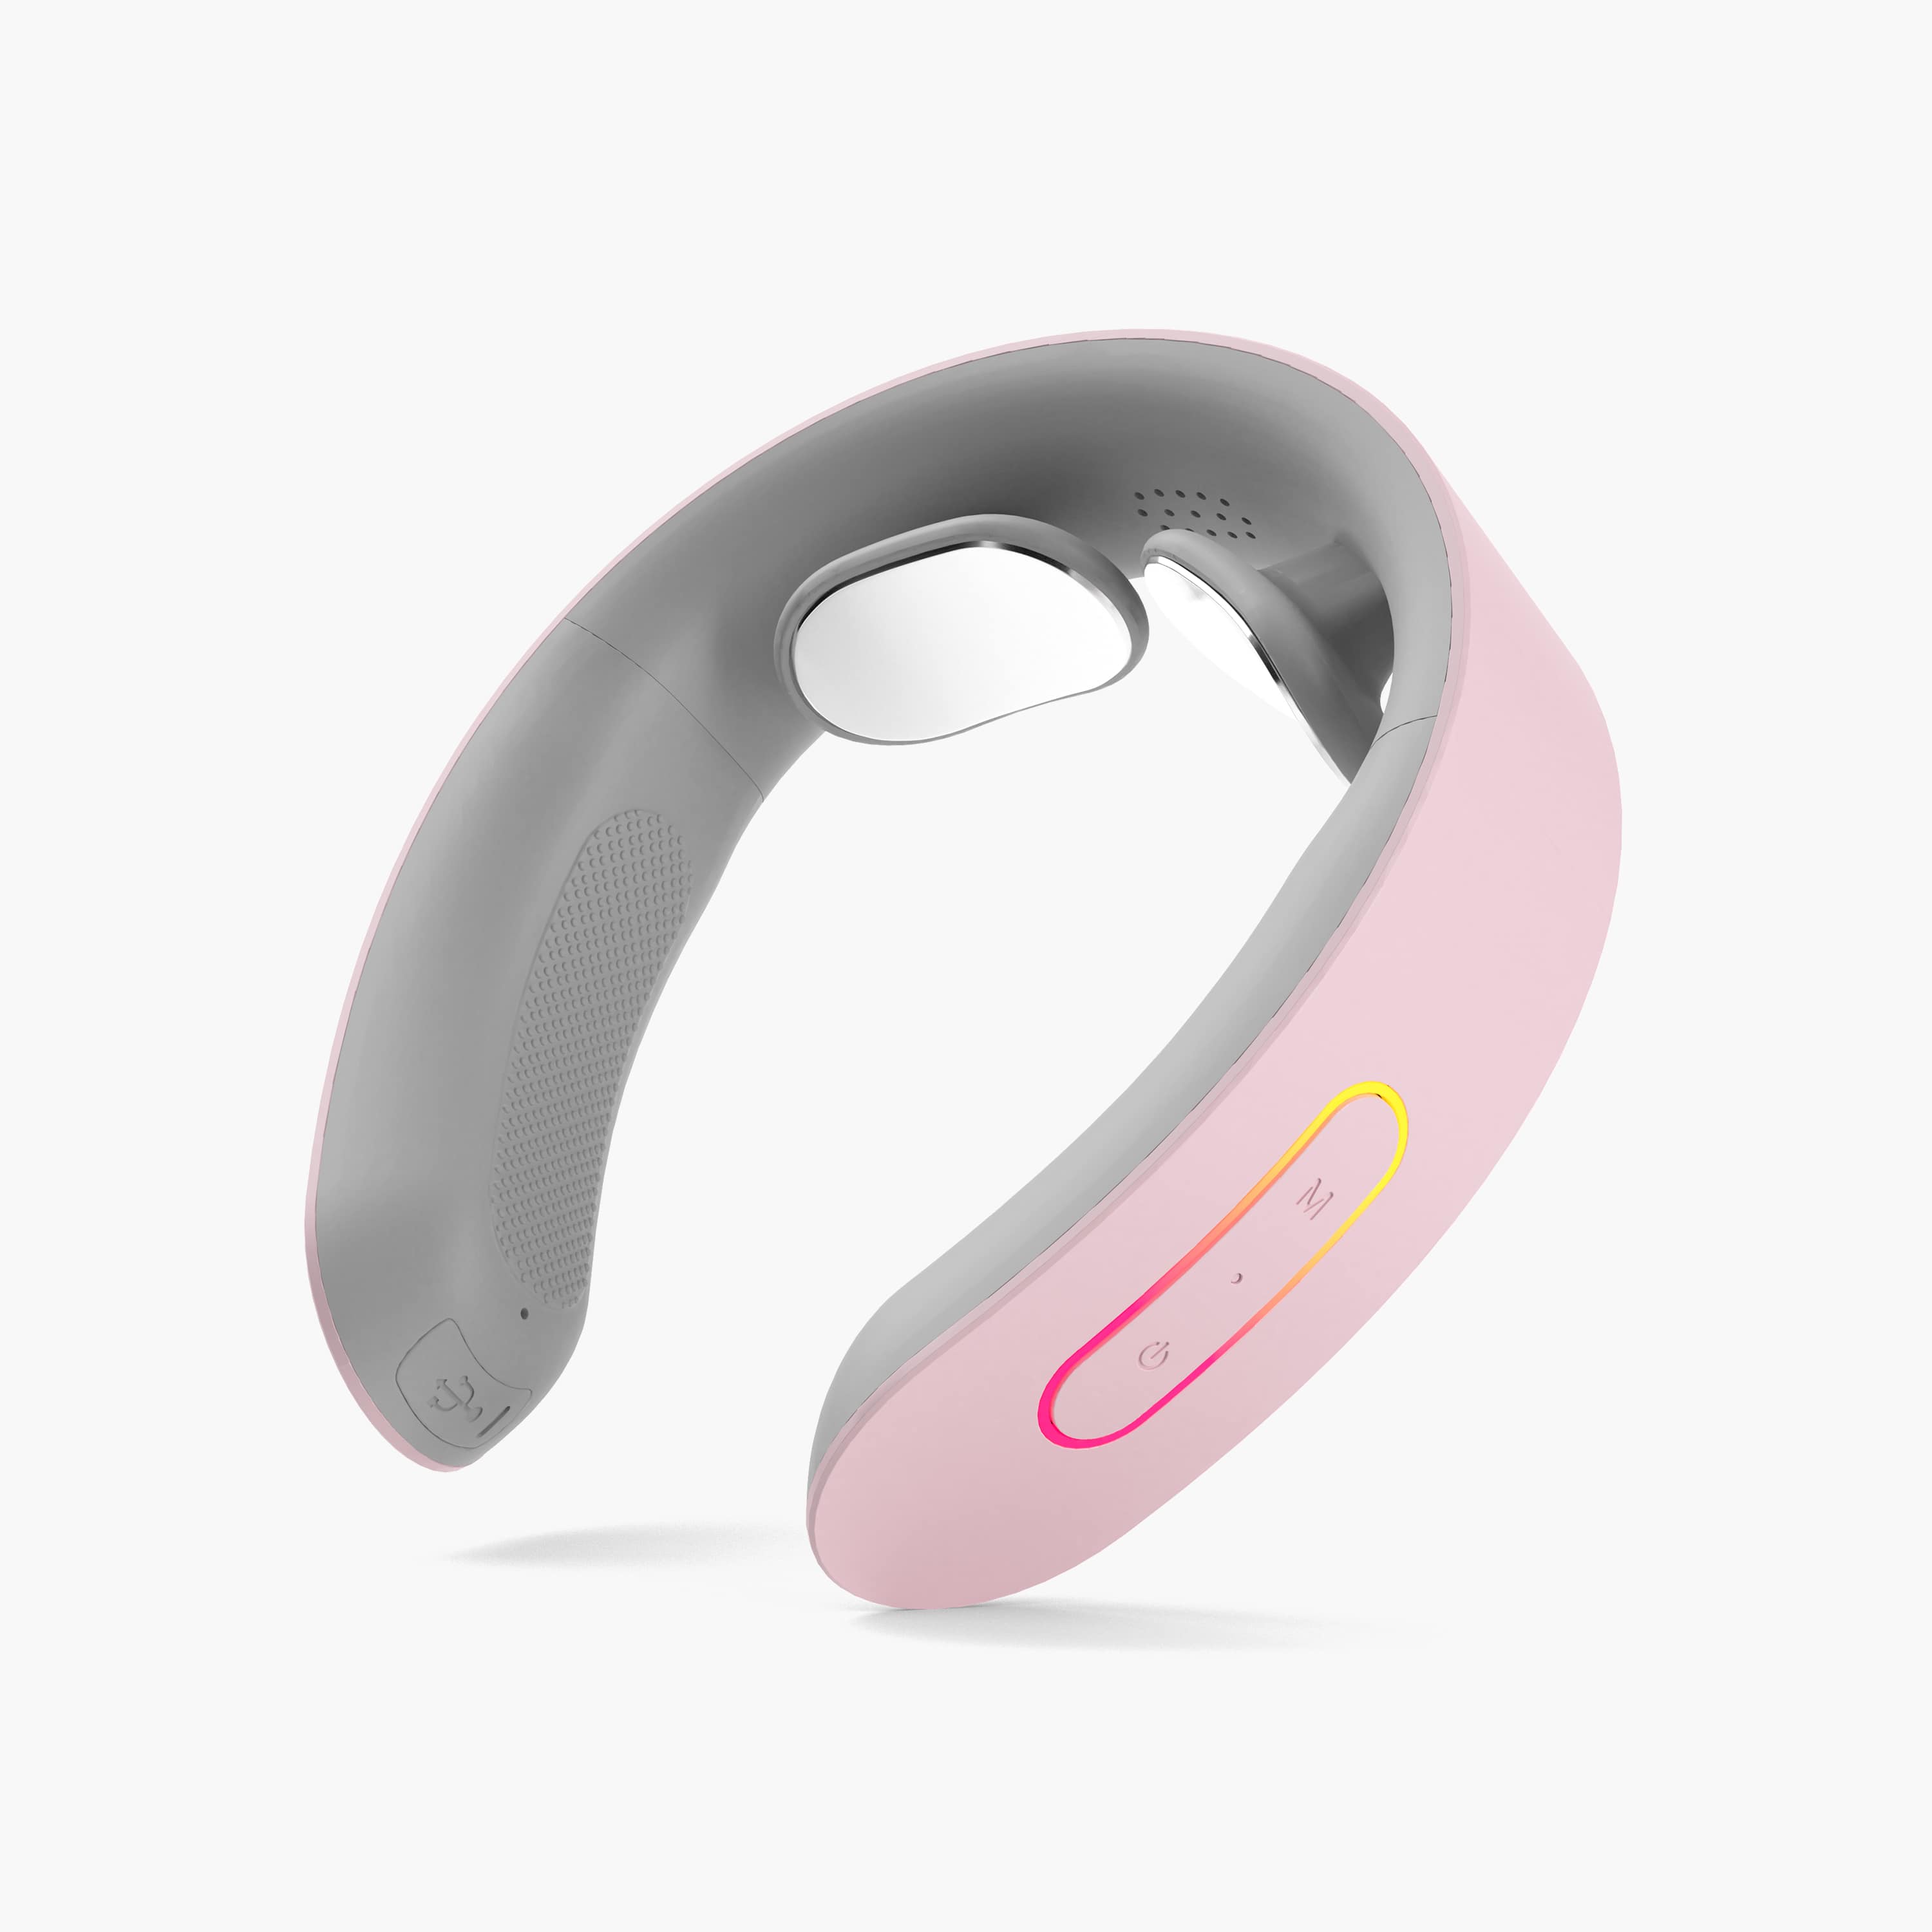 Luna by Nomisk. A pink neck massager that combines heat and pulse therapy to instantly relieve neck pain. Use her to relieve migraines, muscle tension and pain instantly.